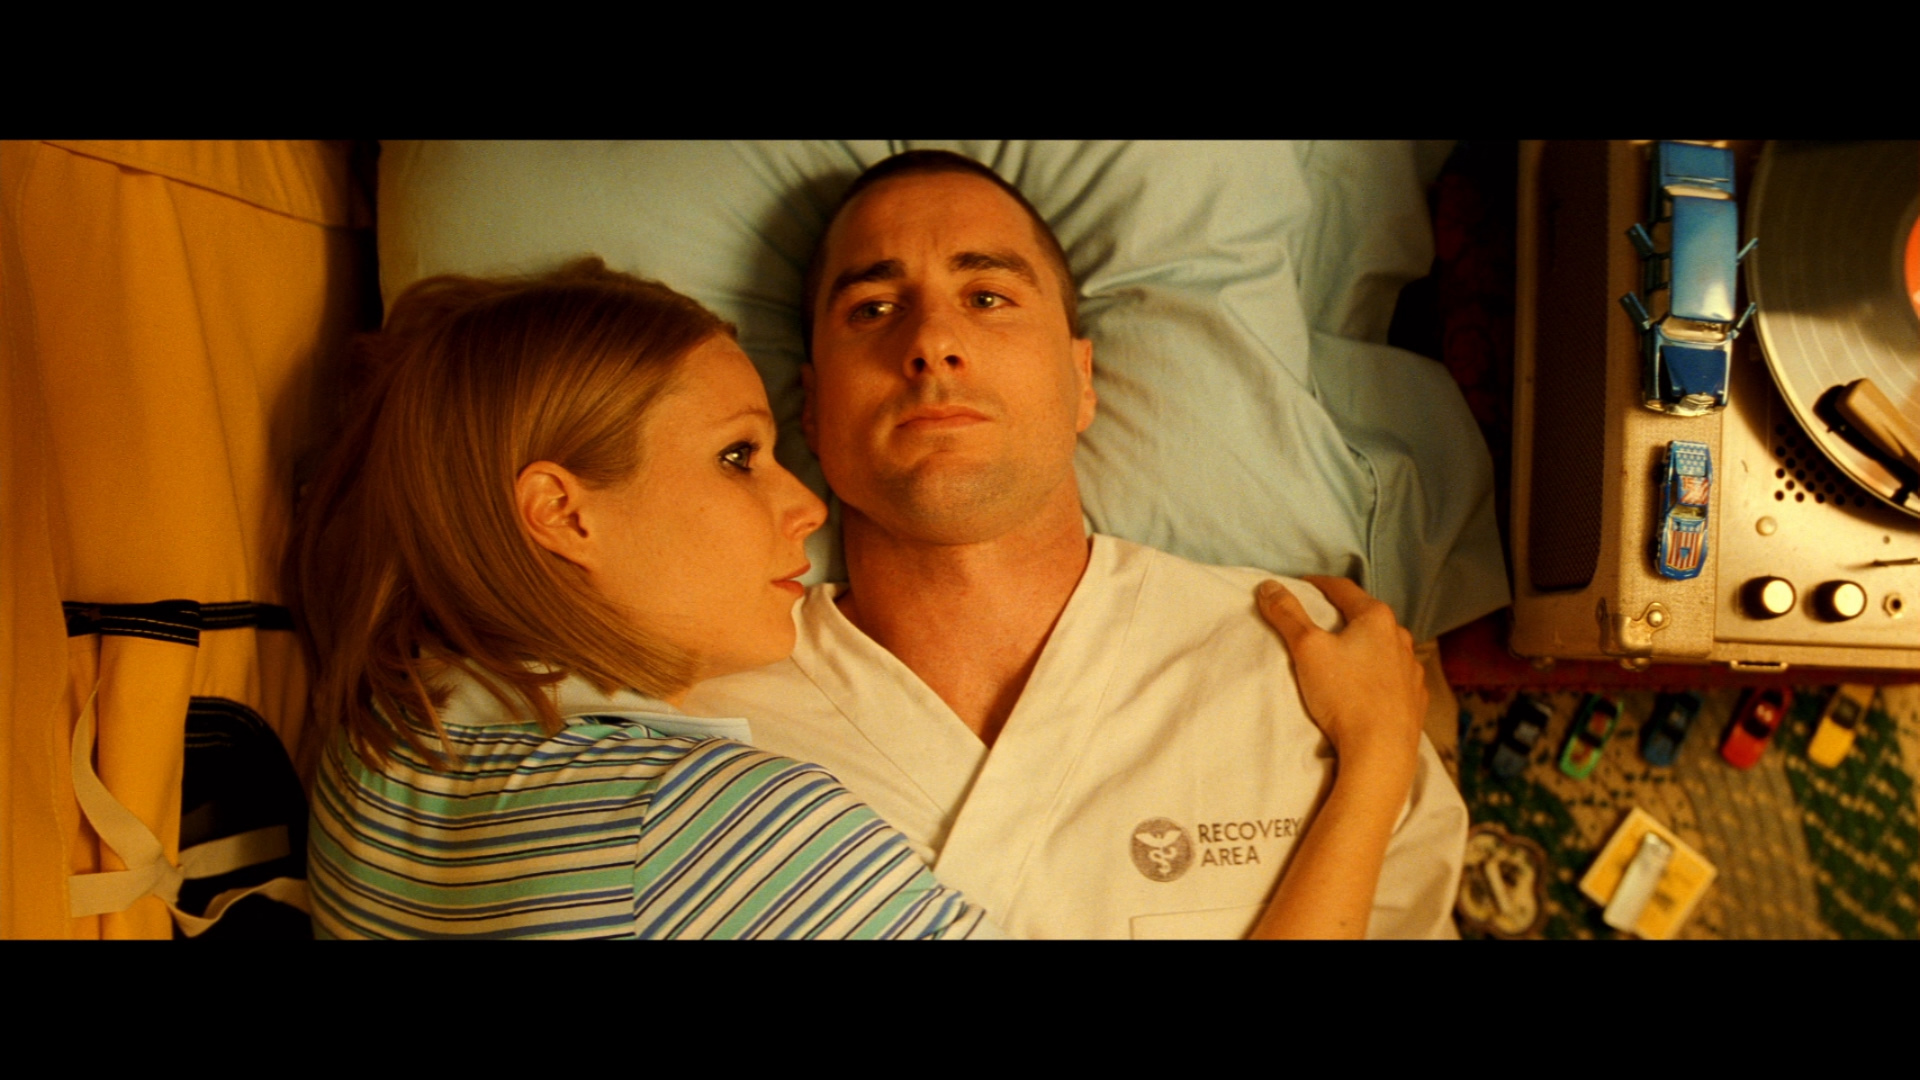 Comedy: Sorry Collider But The Royal Tenenbaums Is The Best Wes Anderson Mo...